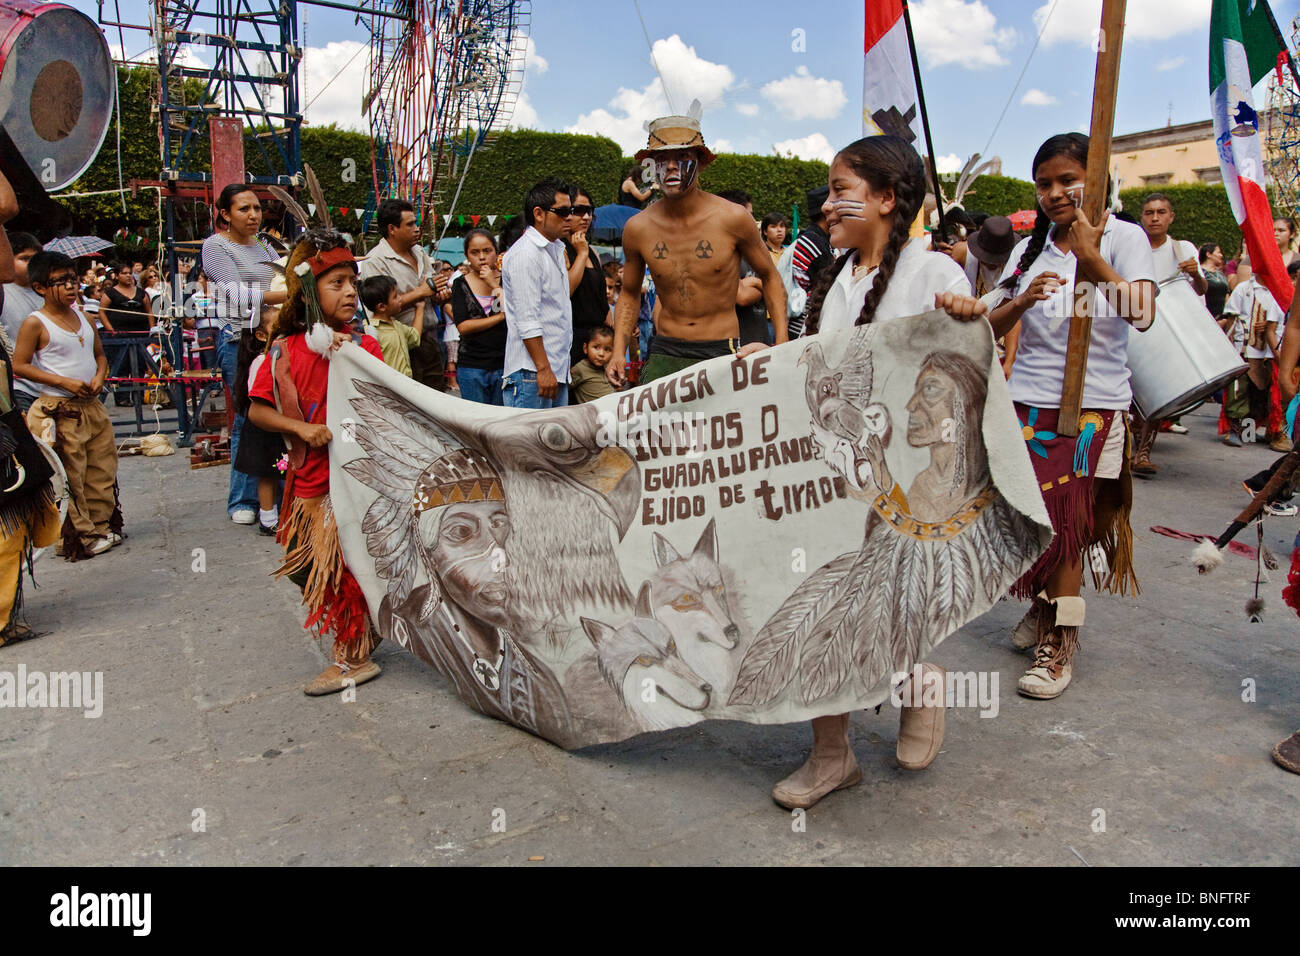 Indigenous children walk with a banner in the annual INDEPENDENCE DAY PARADE in September - SAN MIGUEL DE ALLENDE, MEXICO Stock Photo